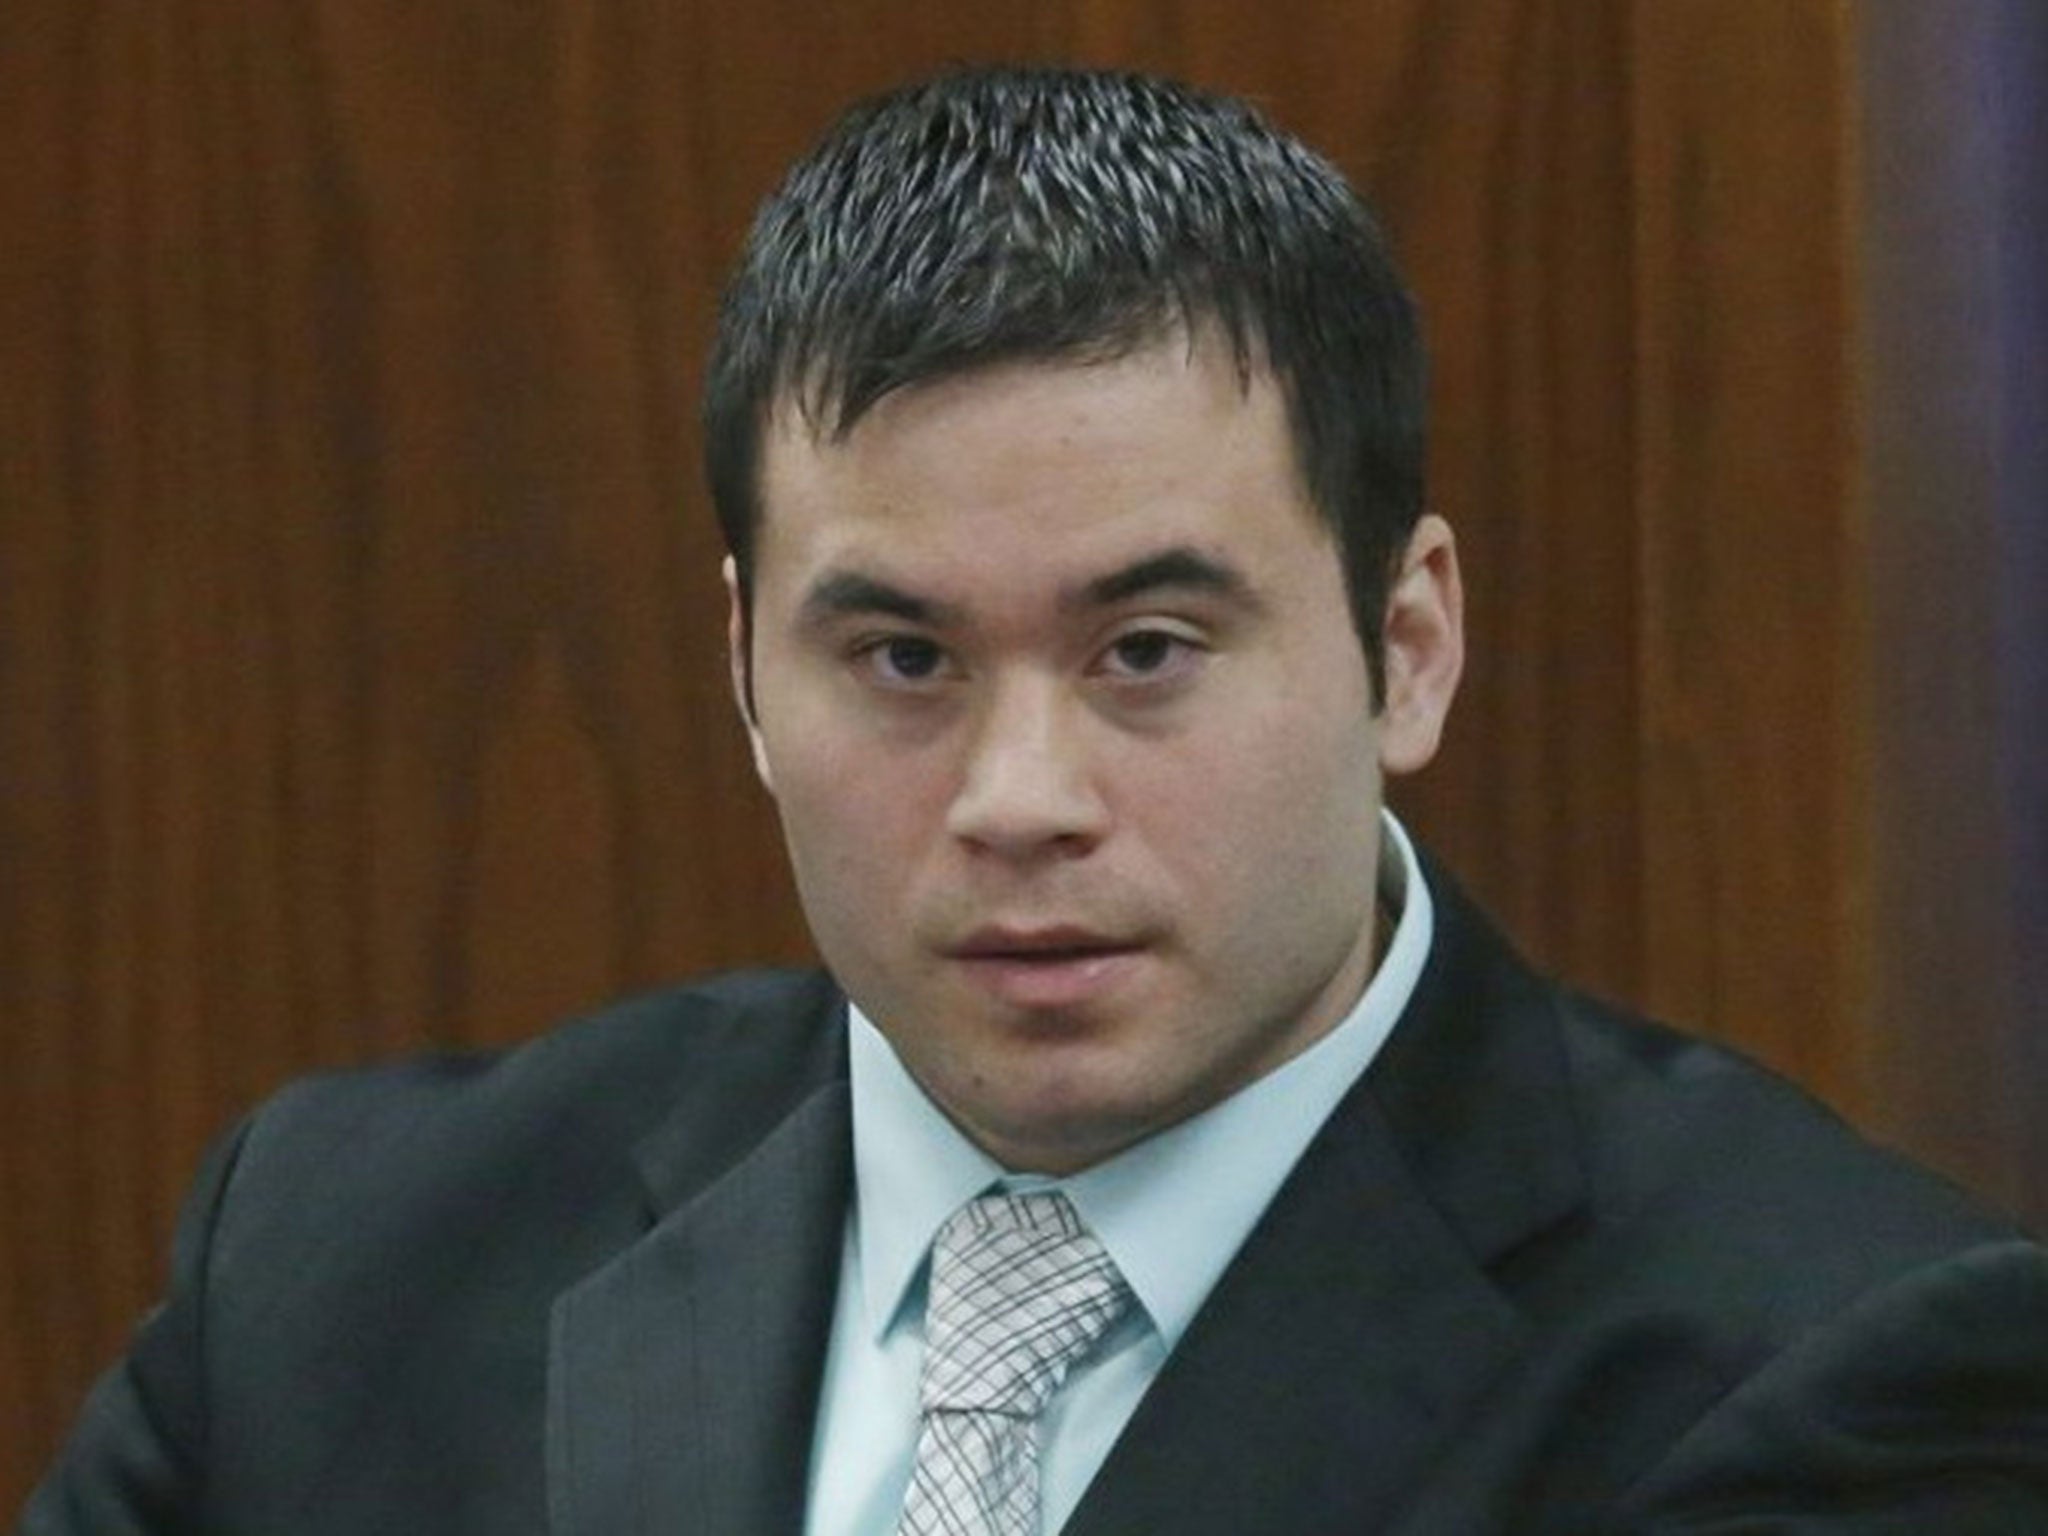 Daniel Holtzclaw picked out vulnerable and troubled black women in poor neighbourhoods to sexually abuse